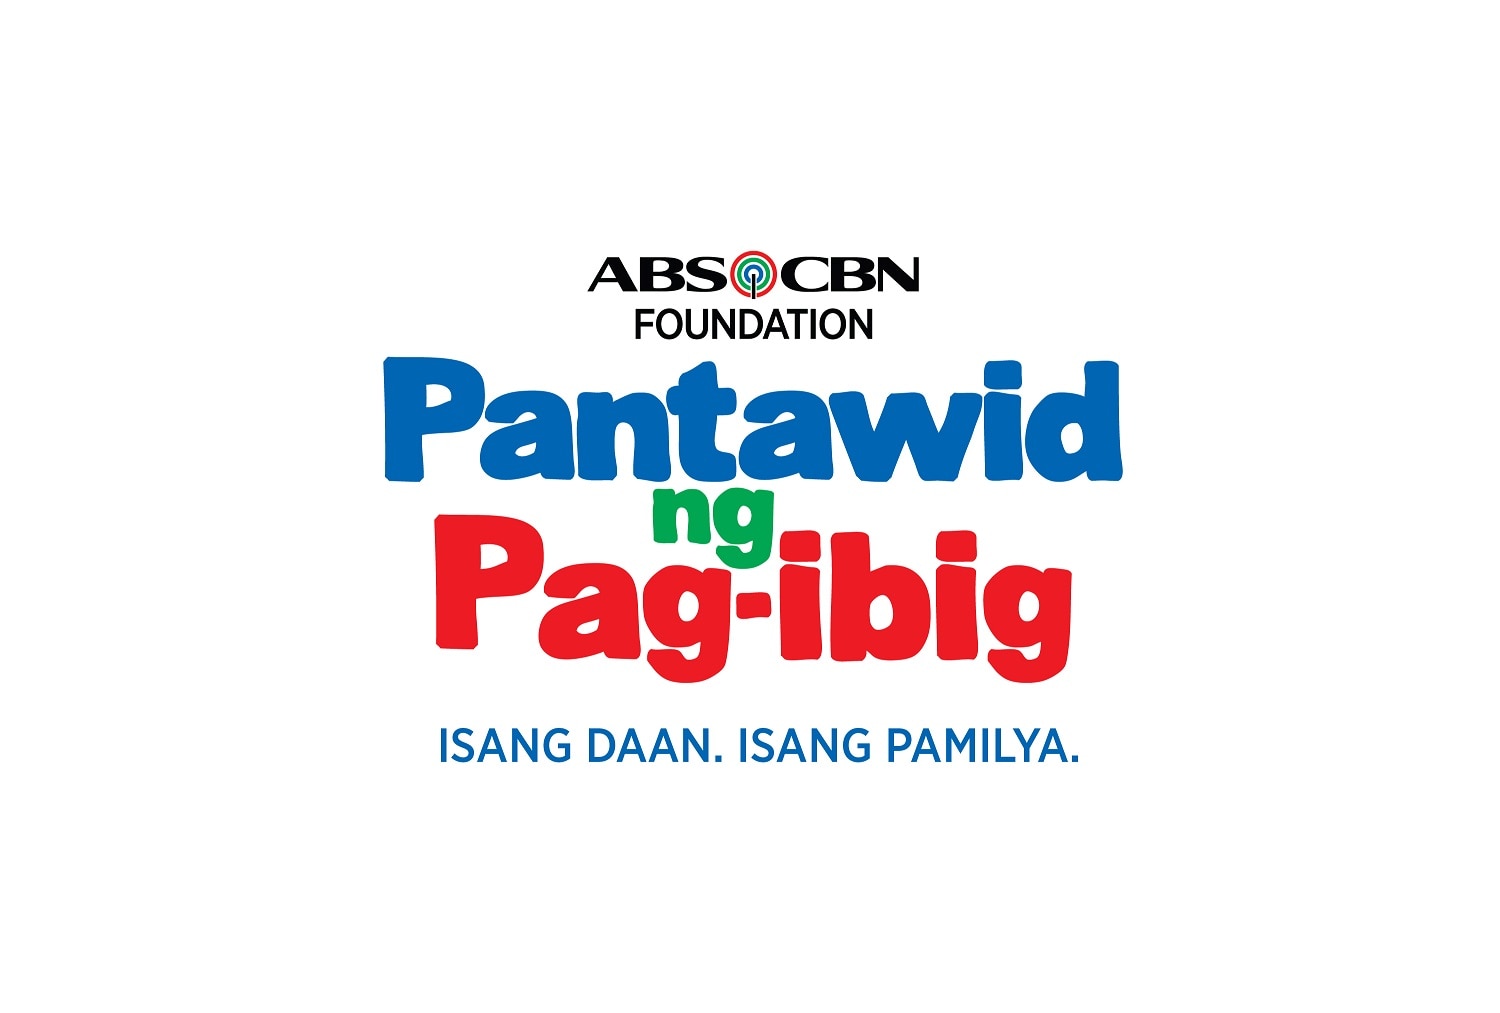 “Pantawid ng Pag-ibig” aids more than 750K families, gears up for 2nd phase to cross 1 million mark